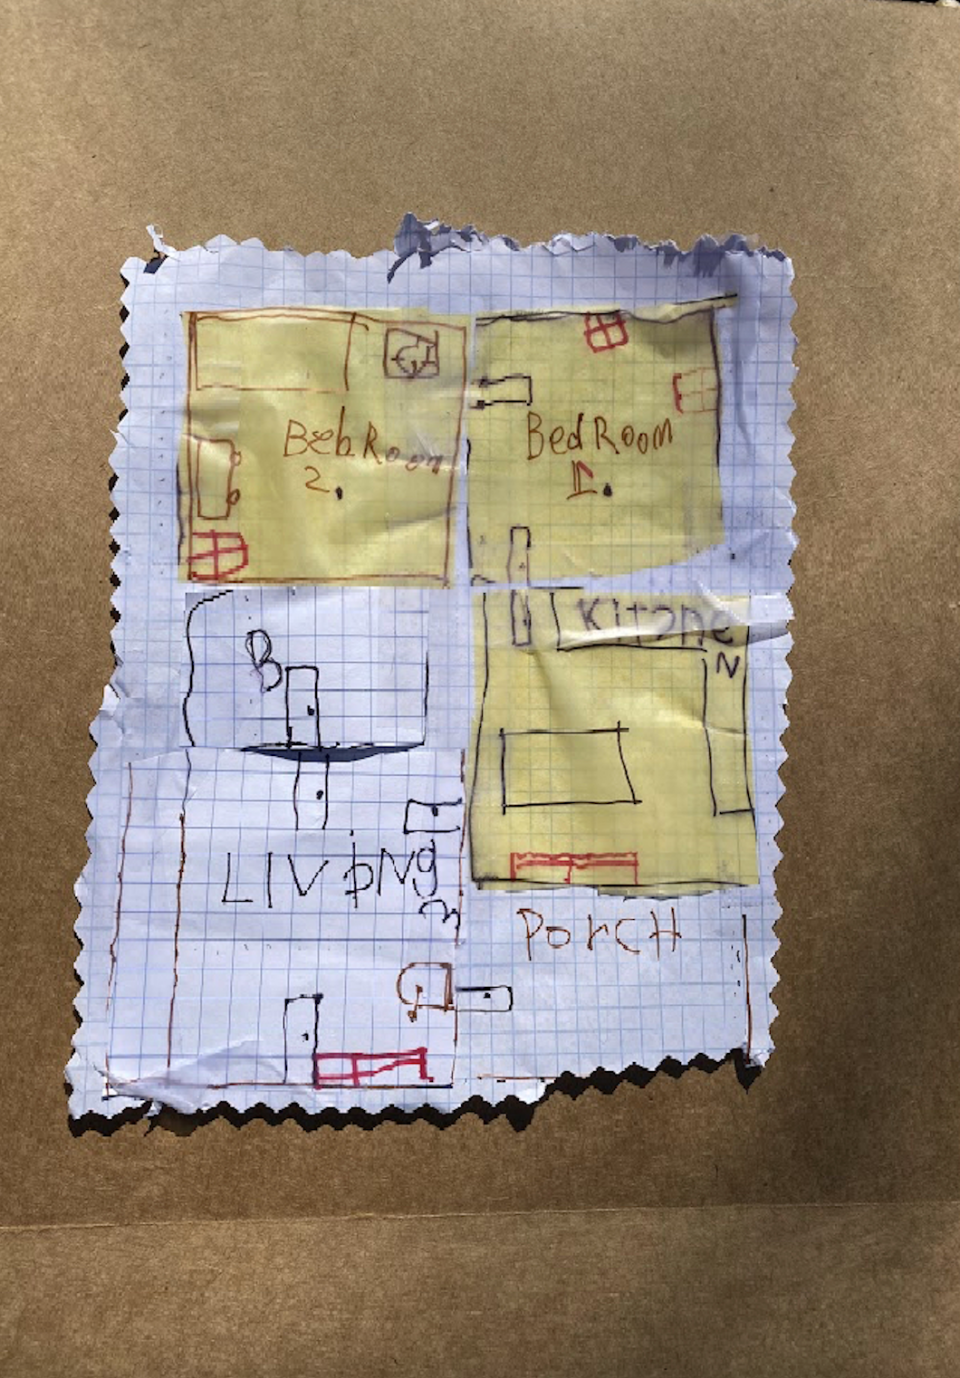 A blueprint drawing created by a Limestone Community School student in Lawrence, Kan., shows the plan for one of the homes the students hope to have built as early as April.